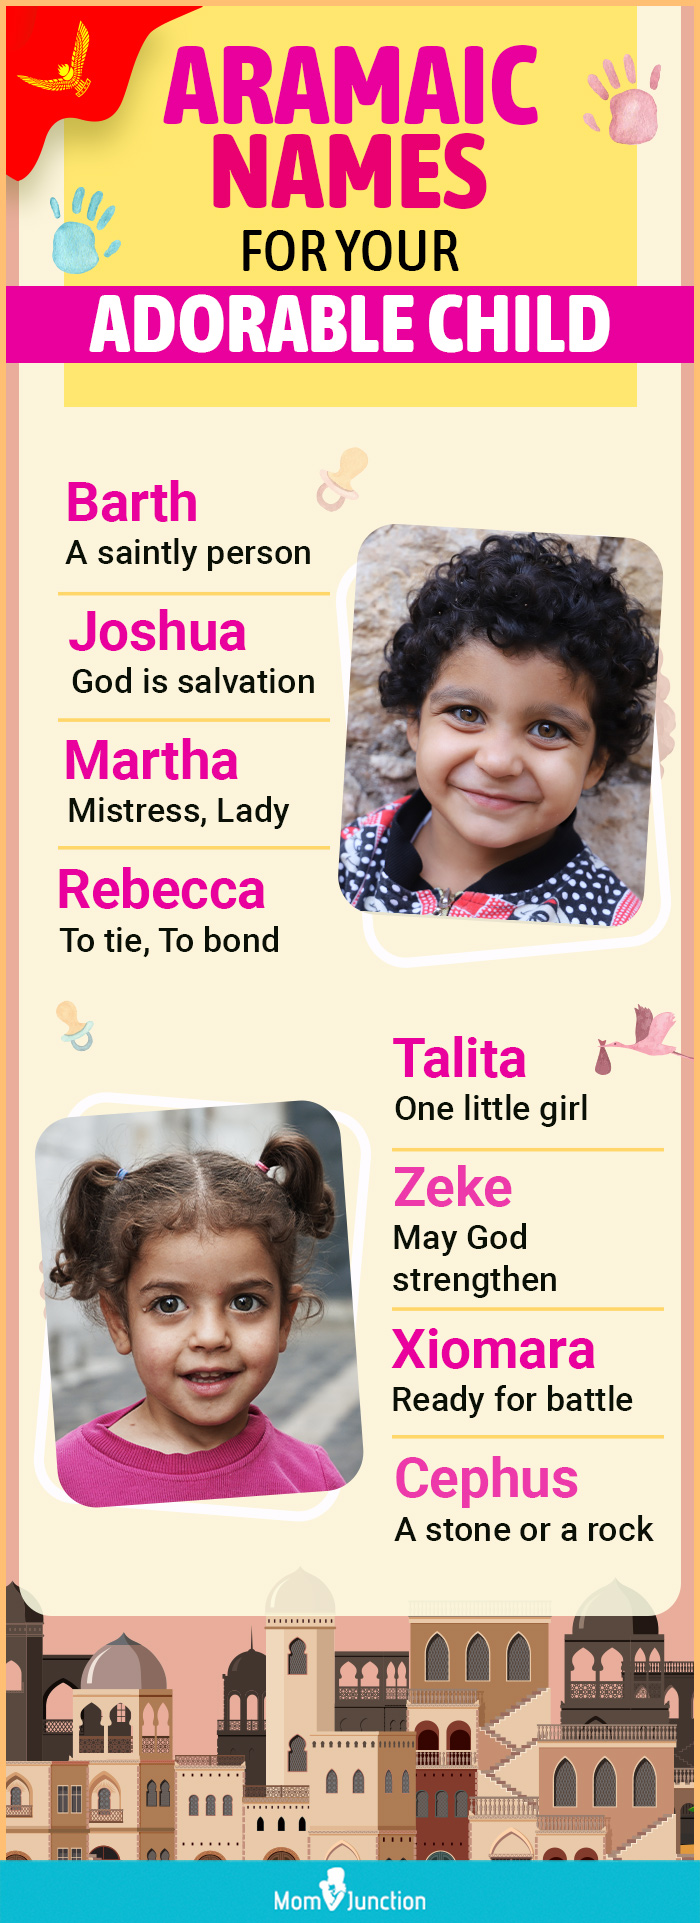 aramaic names for your adorable child (infographic)